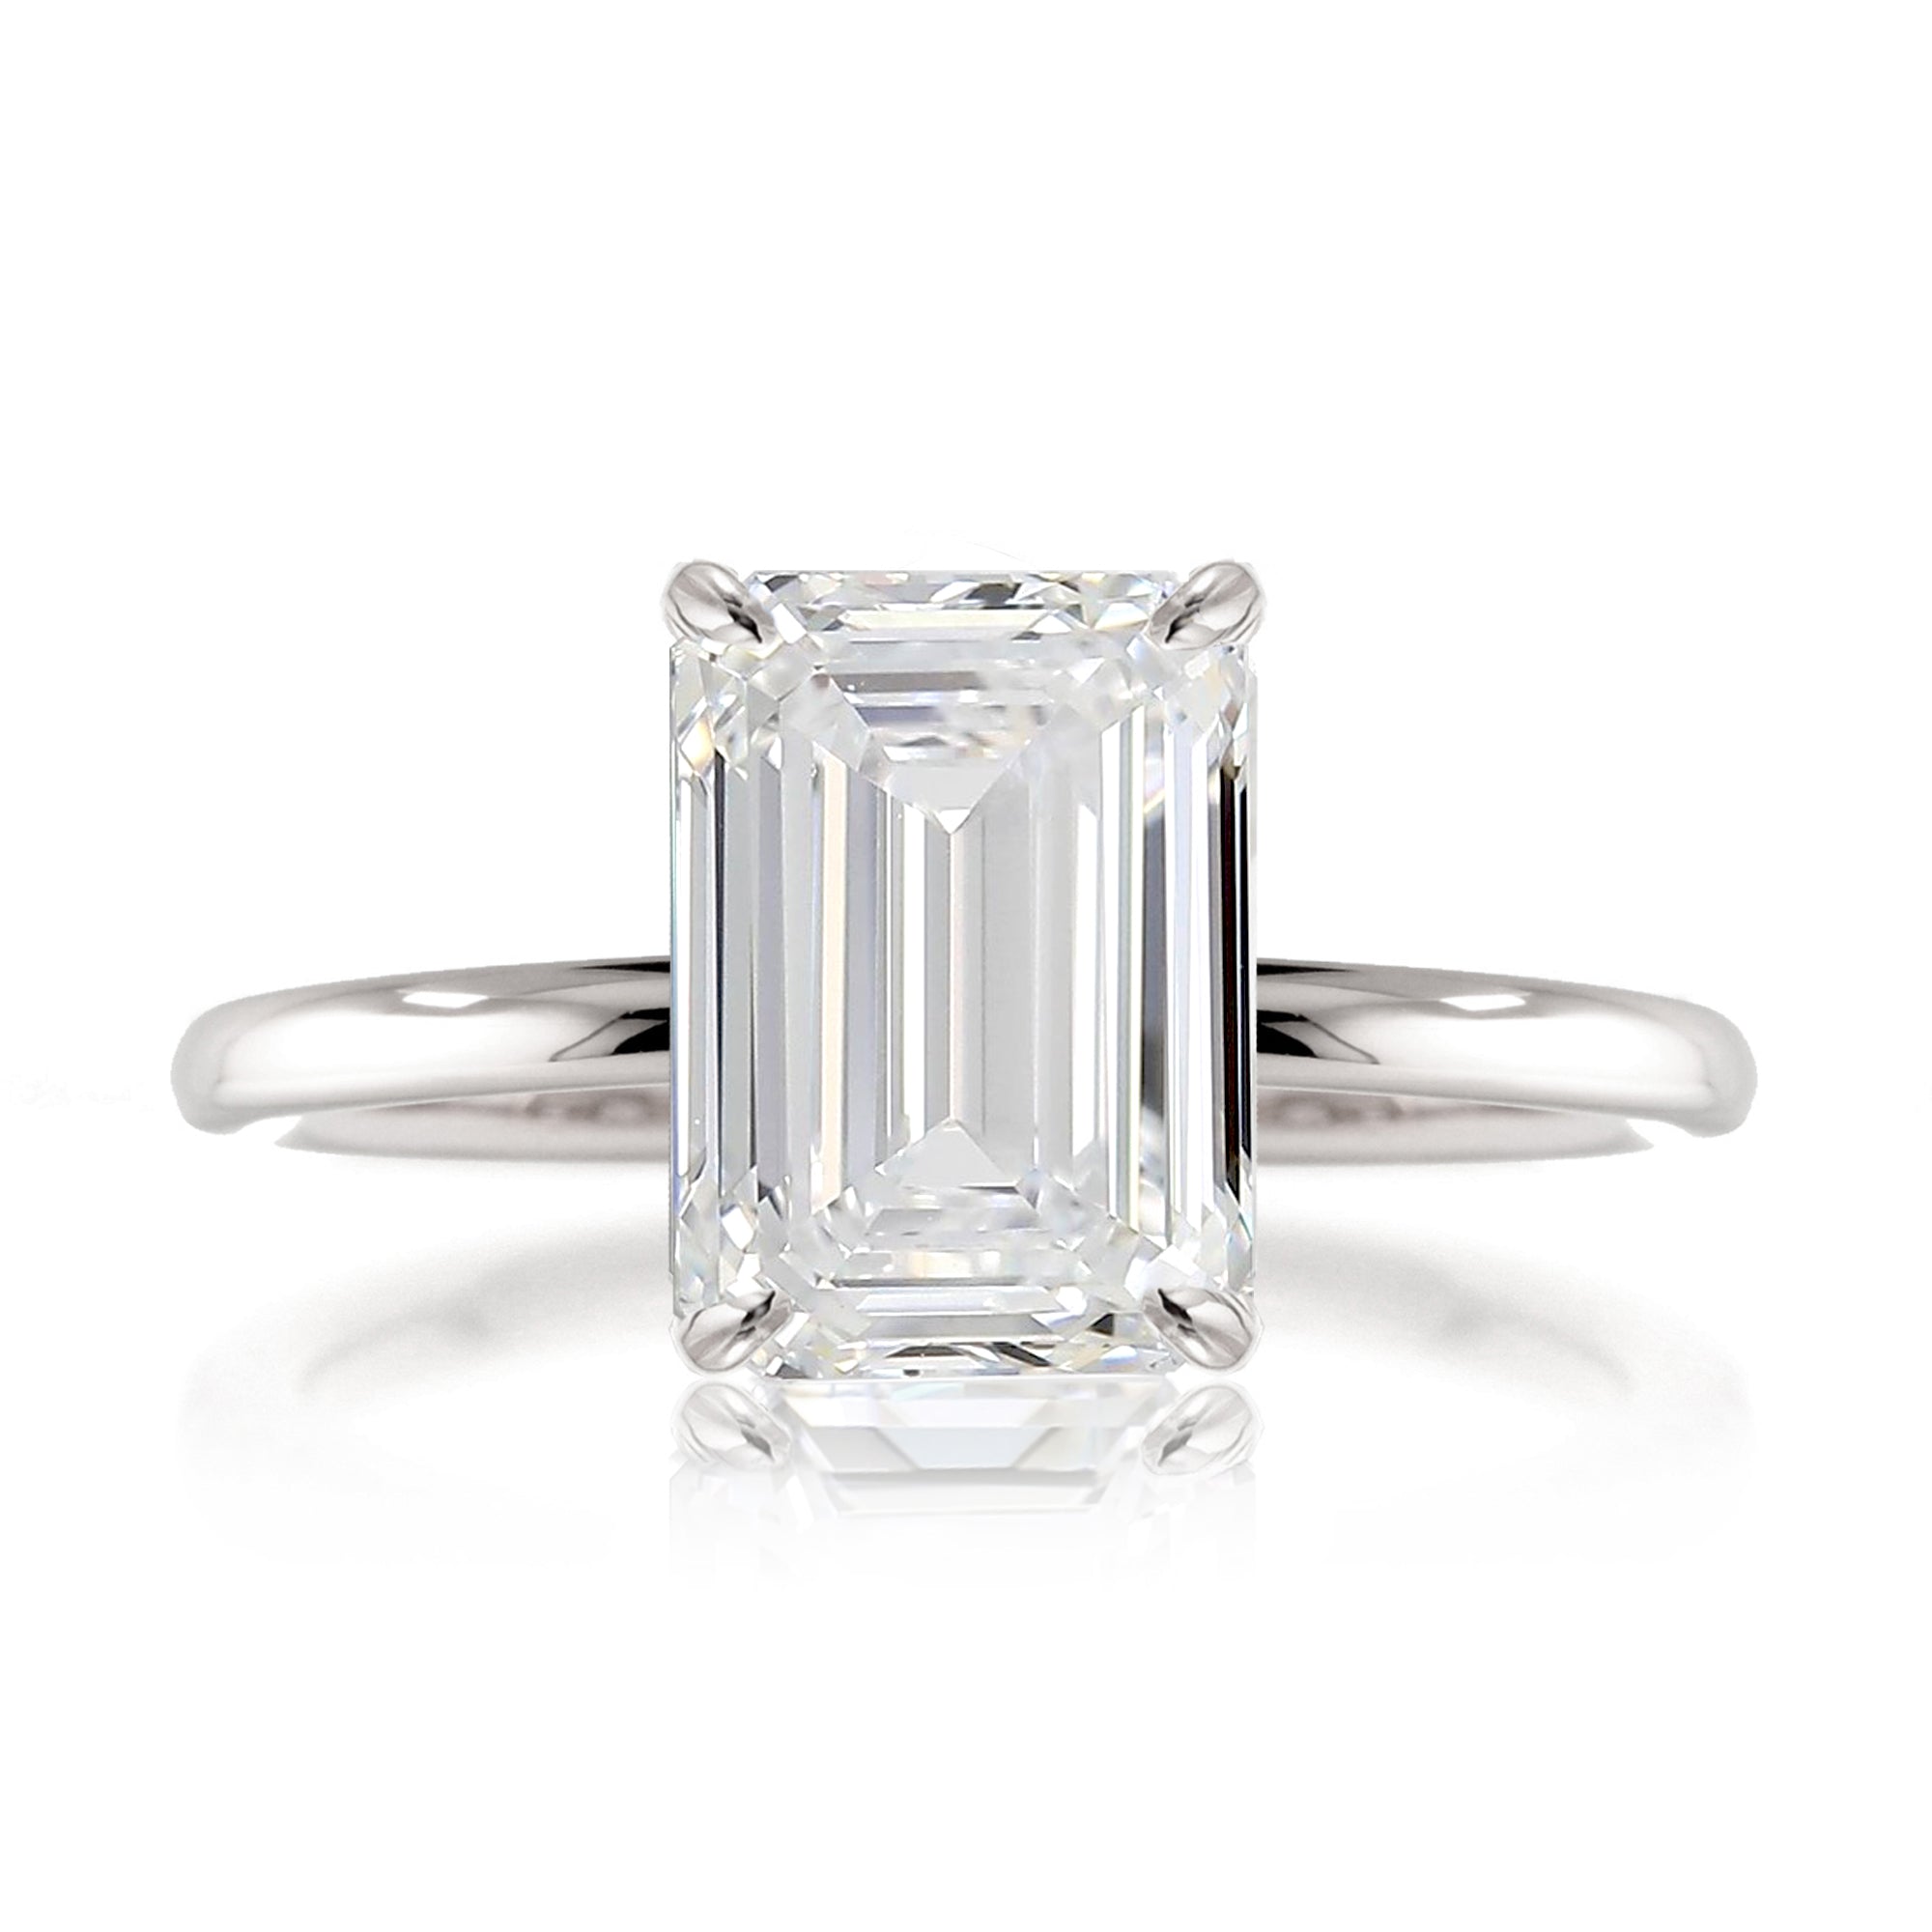 Emerald cut solid band engagement ring white gold - the Ava